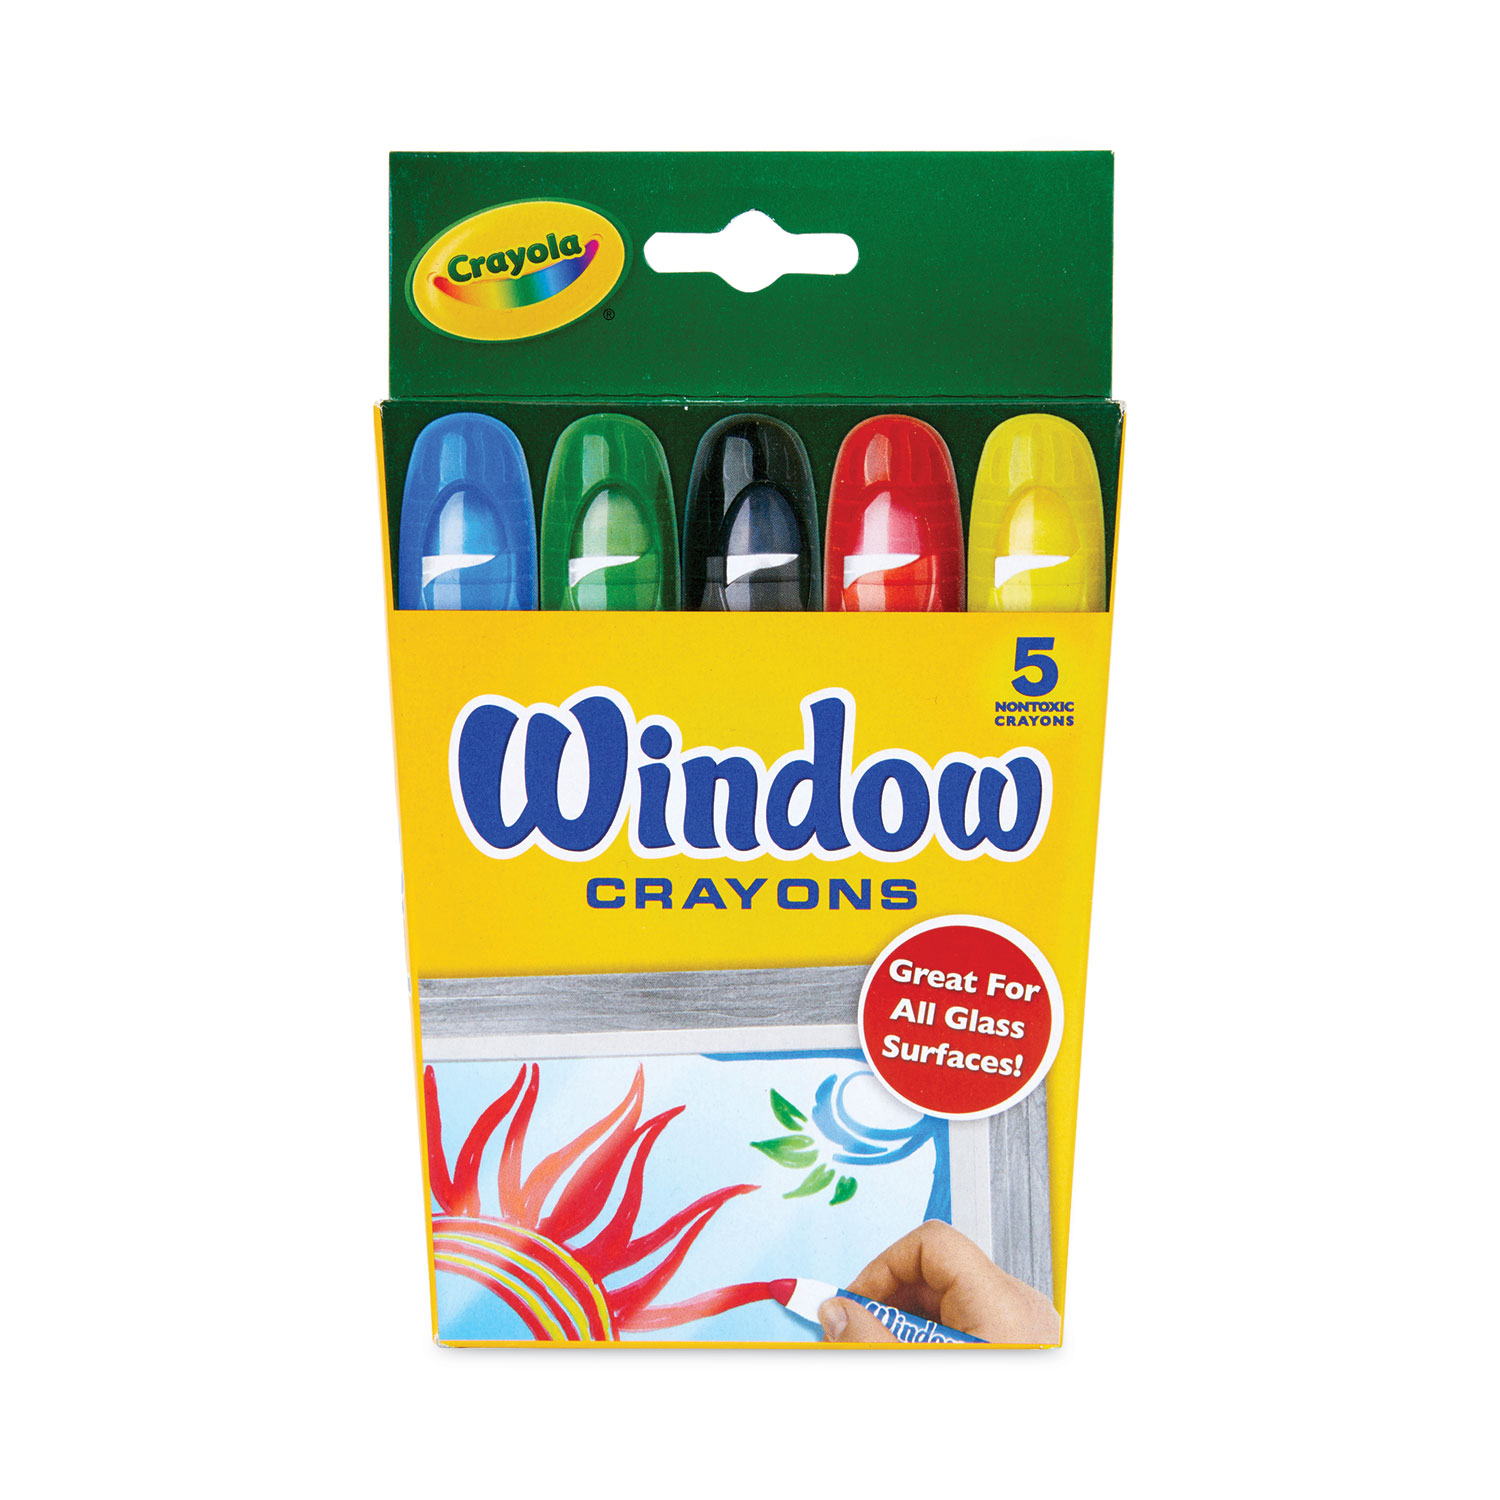 Crayola Super Tips Washable Markers 50 Count Package ONLY $6.99